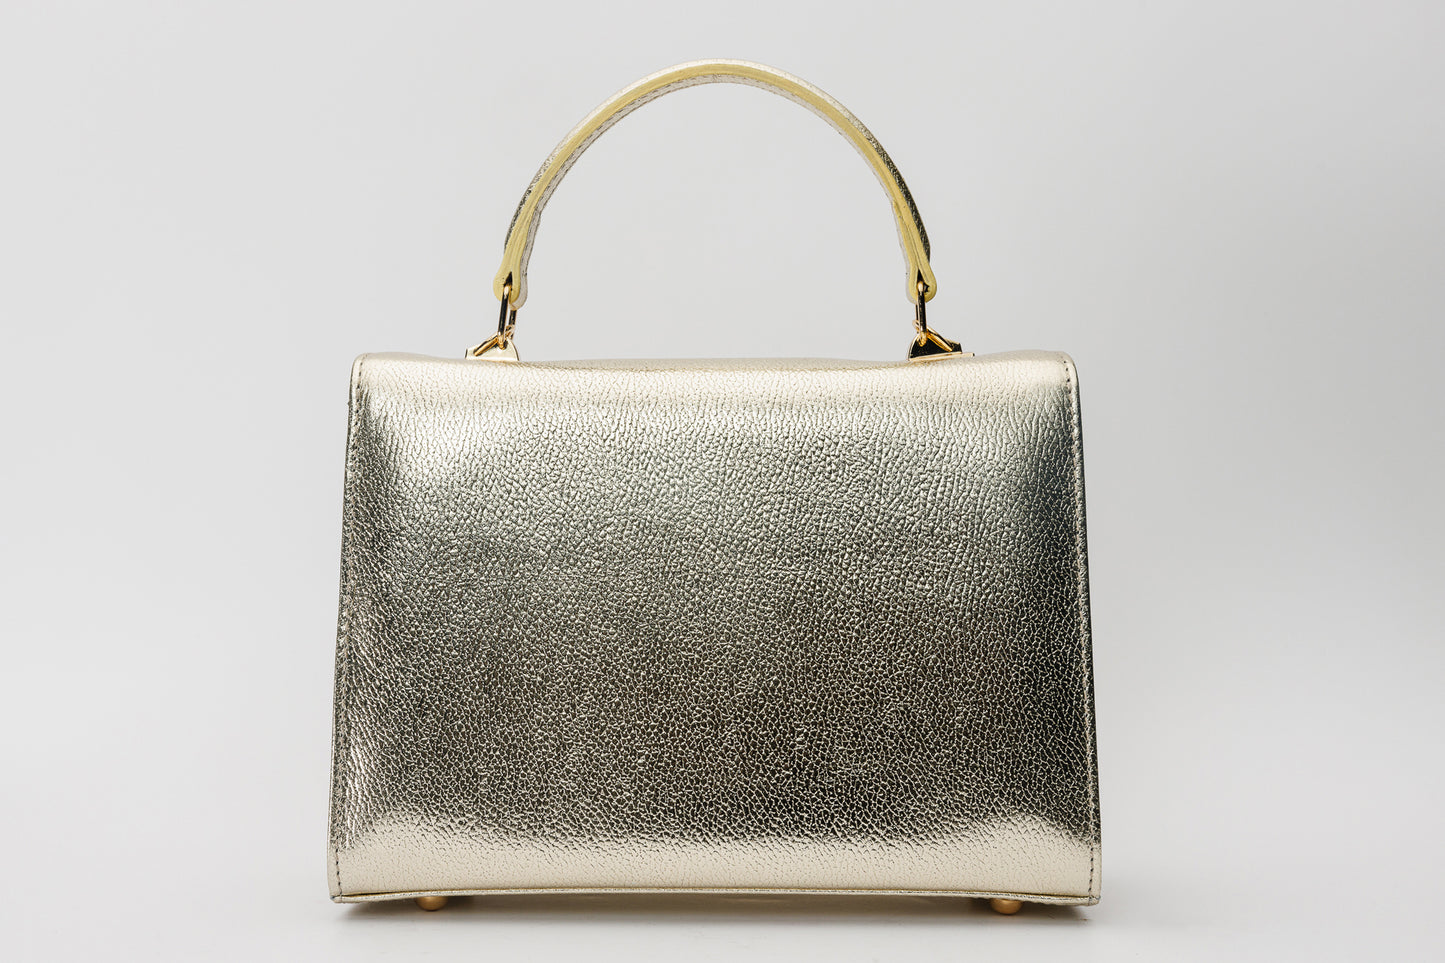 The Ege Gold Leather Hanbag